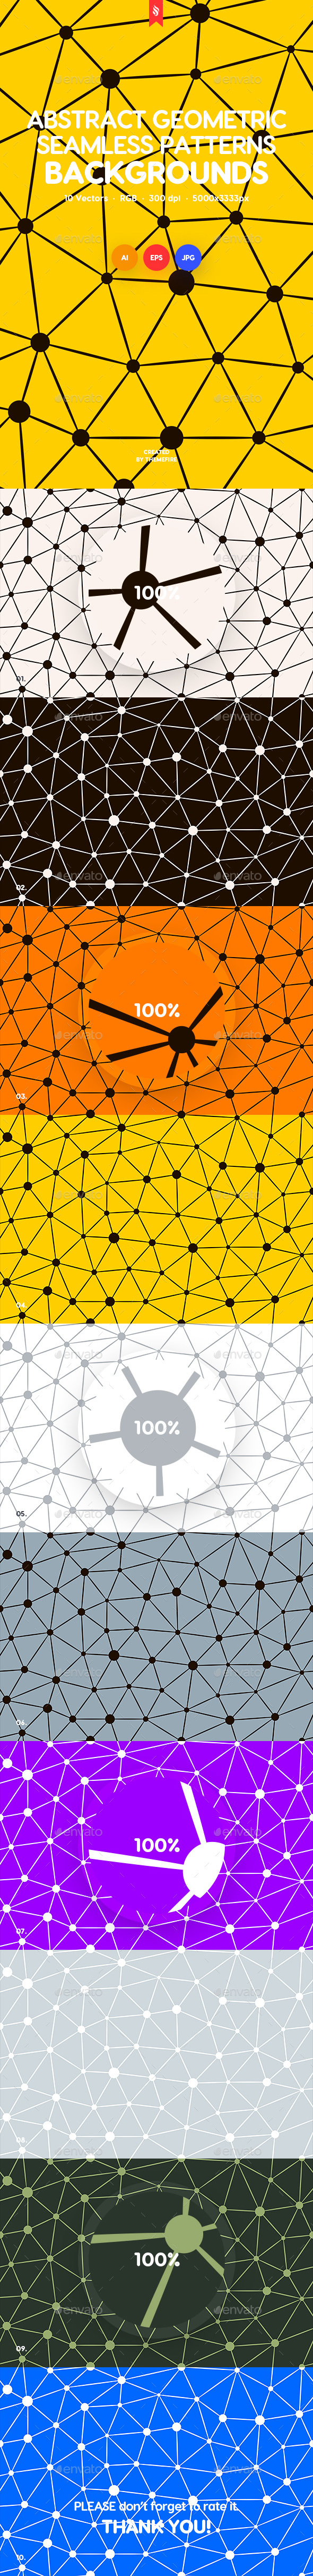 Geometric Seamless Patterns with Connected Lines and Dots Backgrounds